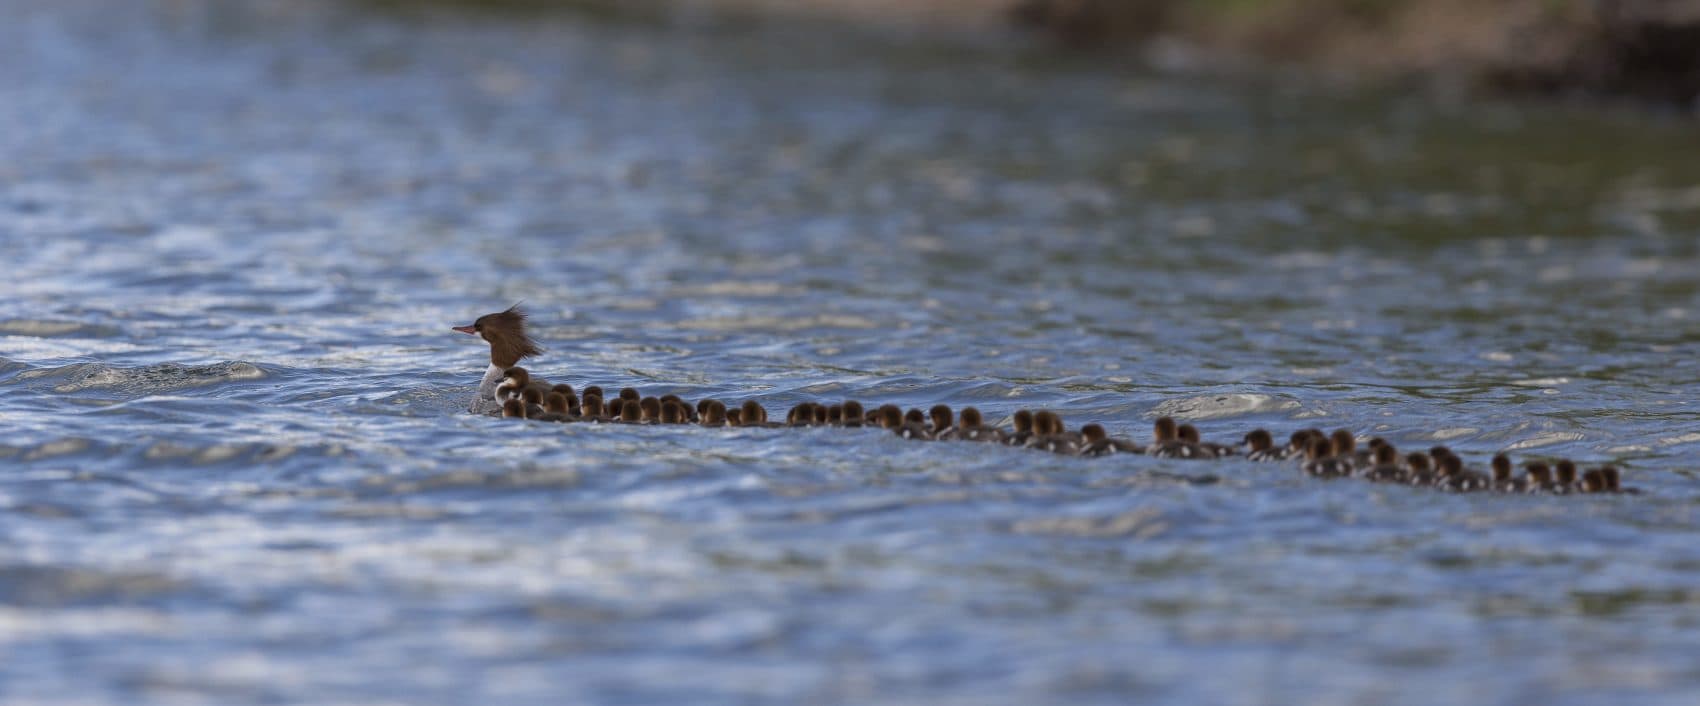 This June 27, 2018, photo provided by Brent Cizek shows a common merganser and a large group of ducklings following her, on Lake Bemidji in Bemidji, Minn. (Brent Cizek/brentcizekphoto.com via AP)